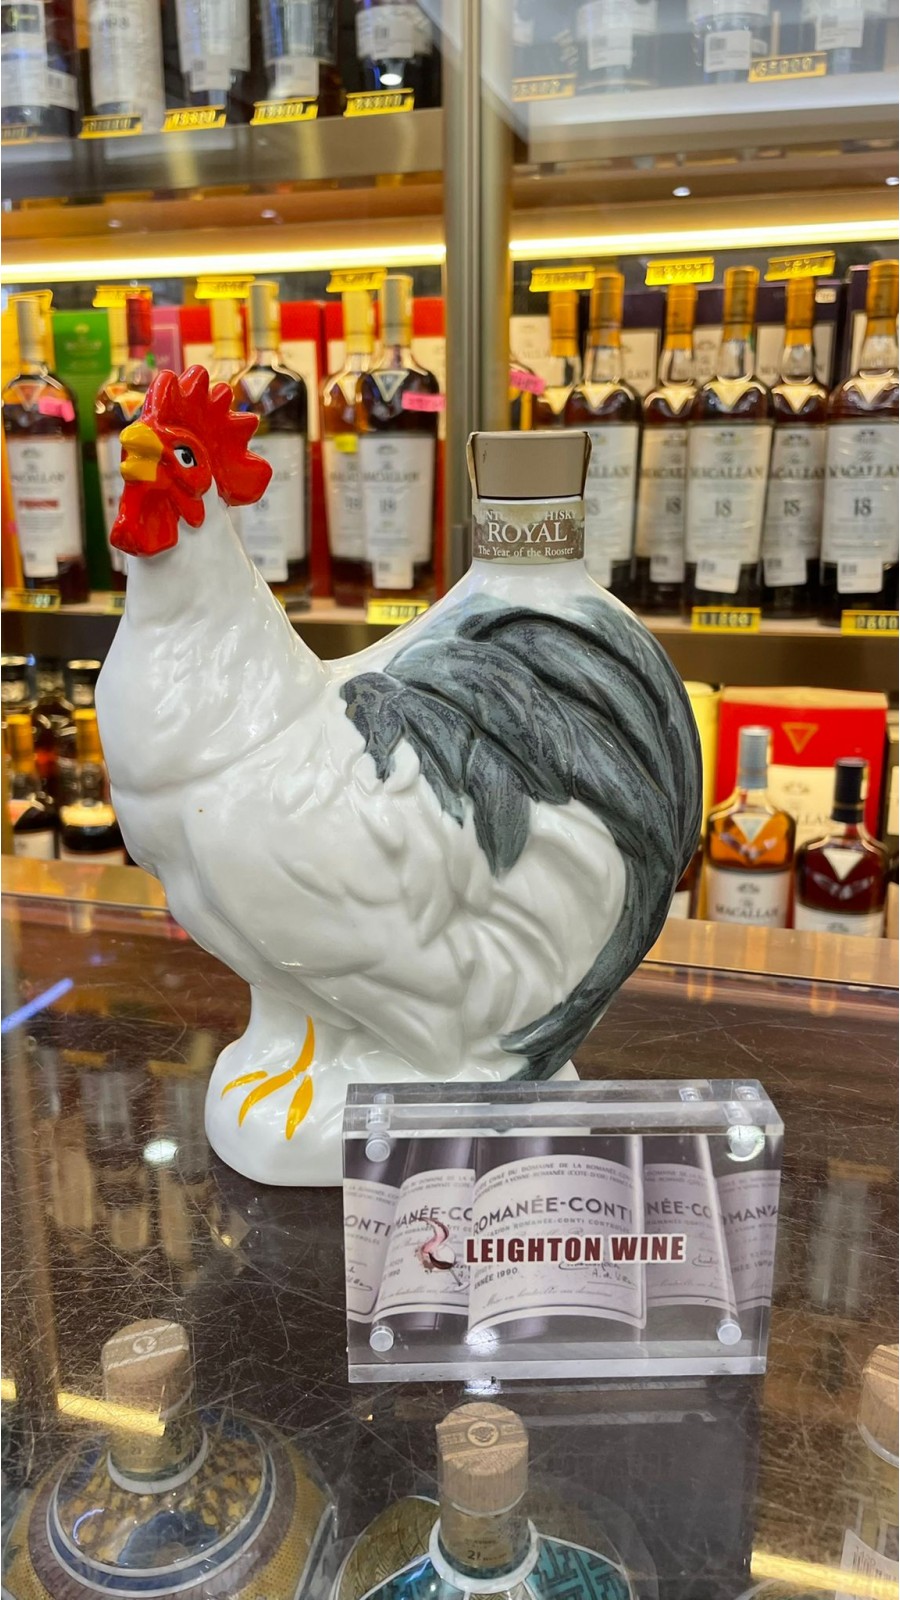 Suntory Royal 12 Year Old 2005 – Rooster 三得利 威士忌 生肖 2005年 雞 600ml (without Box)